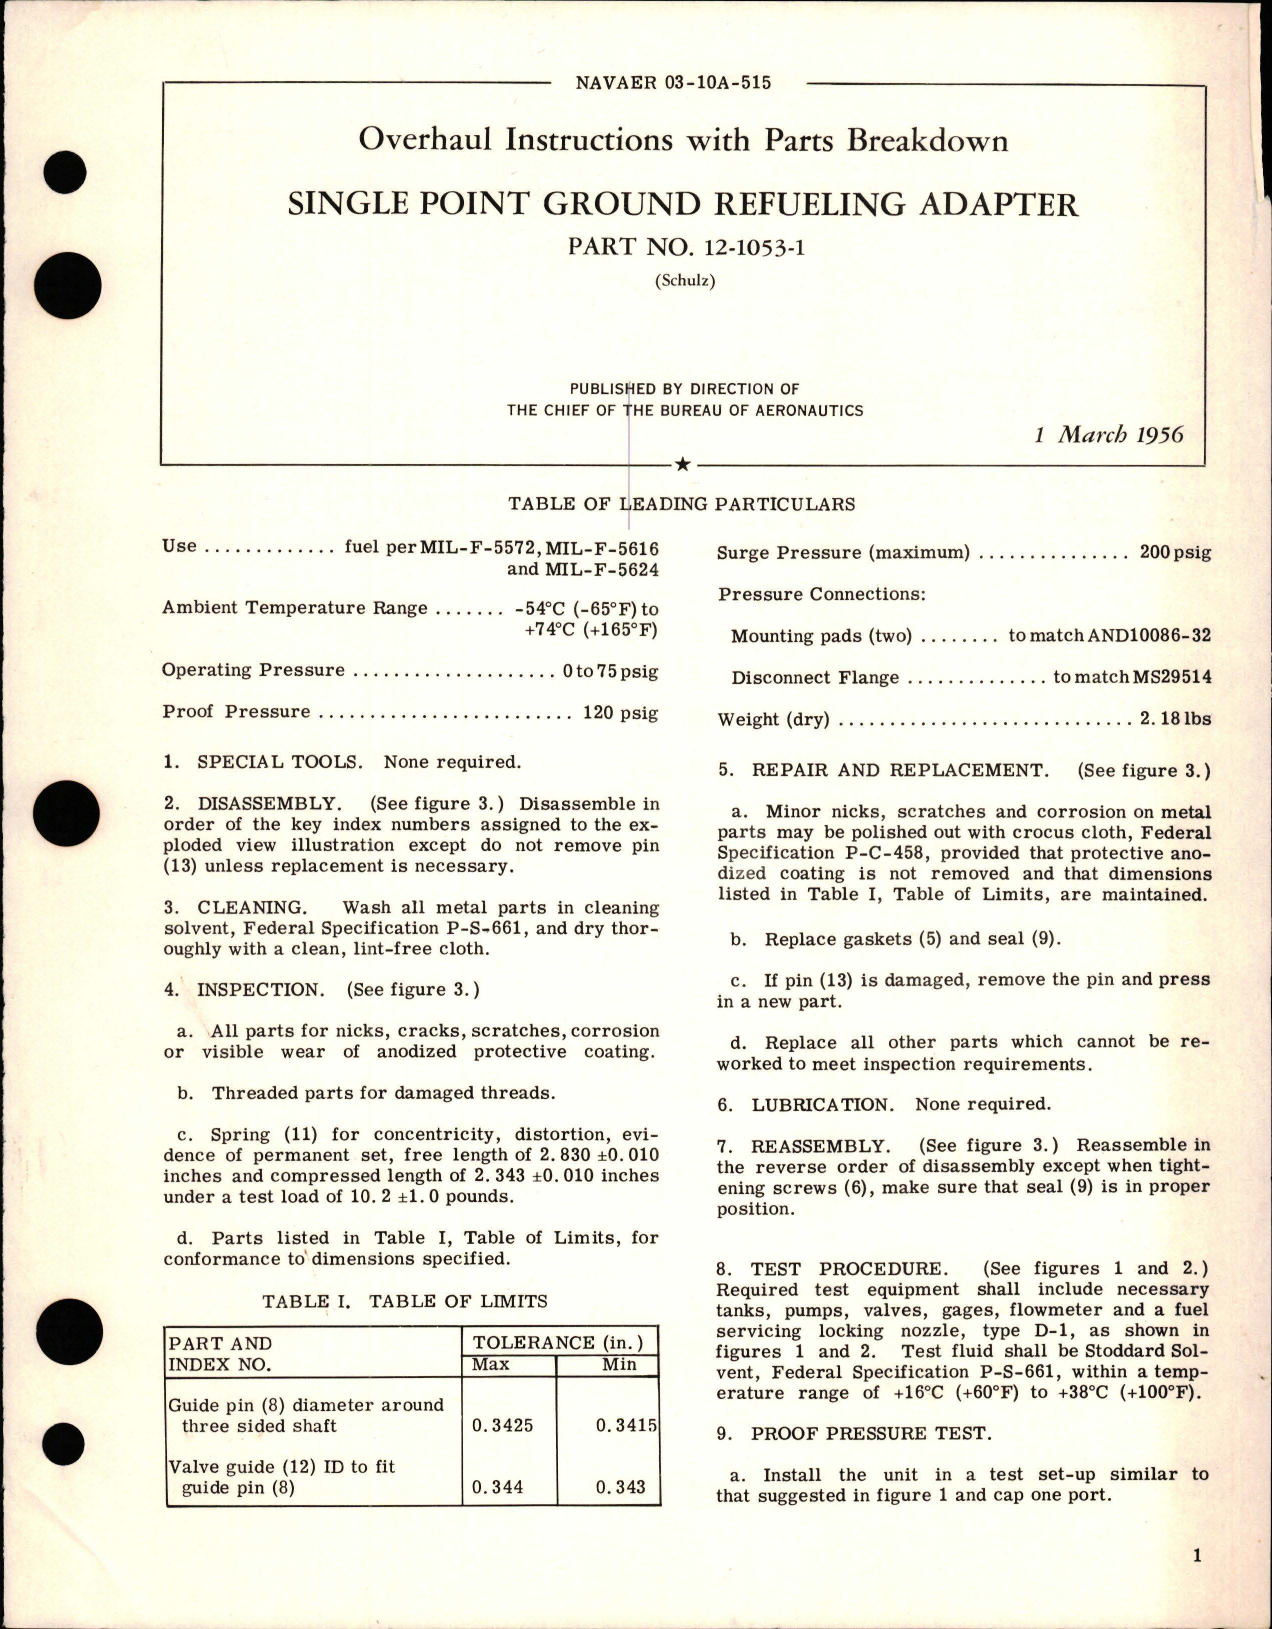 Sample page 1 from AirCorps Library document: Overhaul Instructions with Parts Breakdown for Single Point Ground Refueling Adapter - Part 12-1053-1